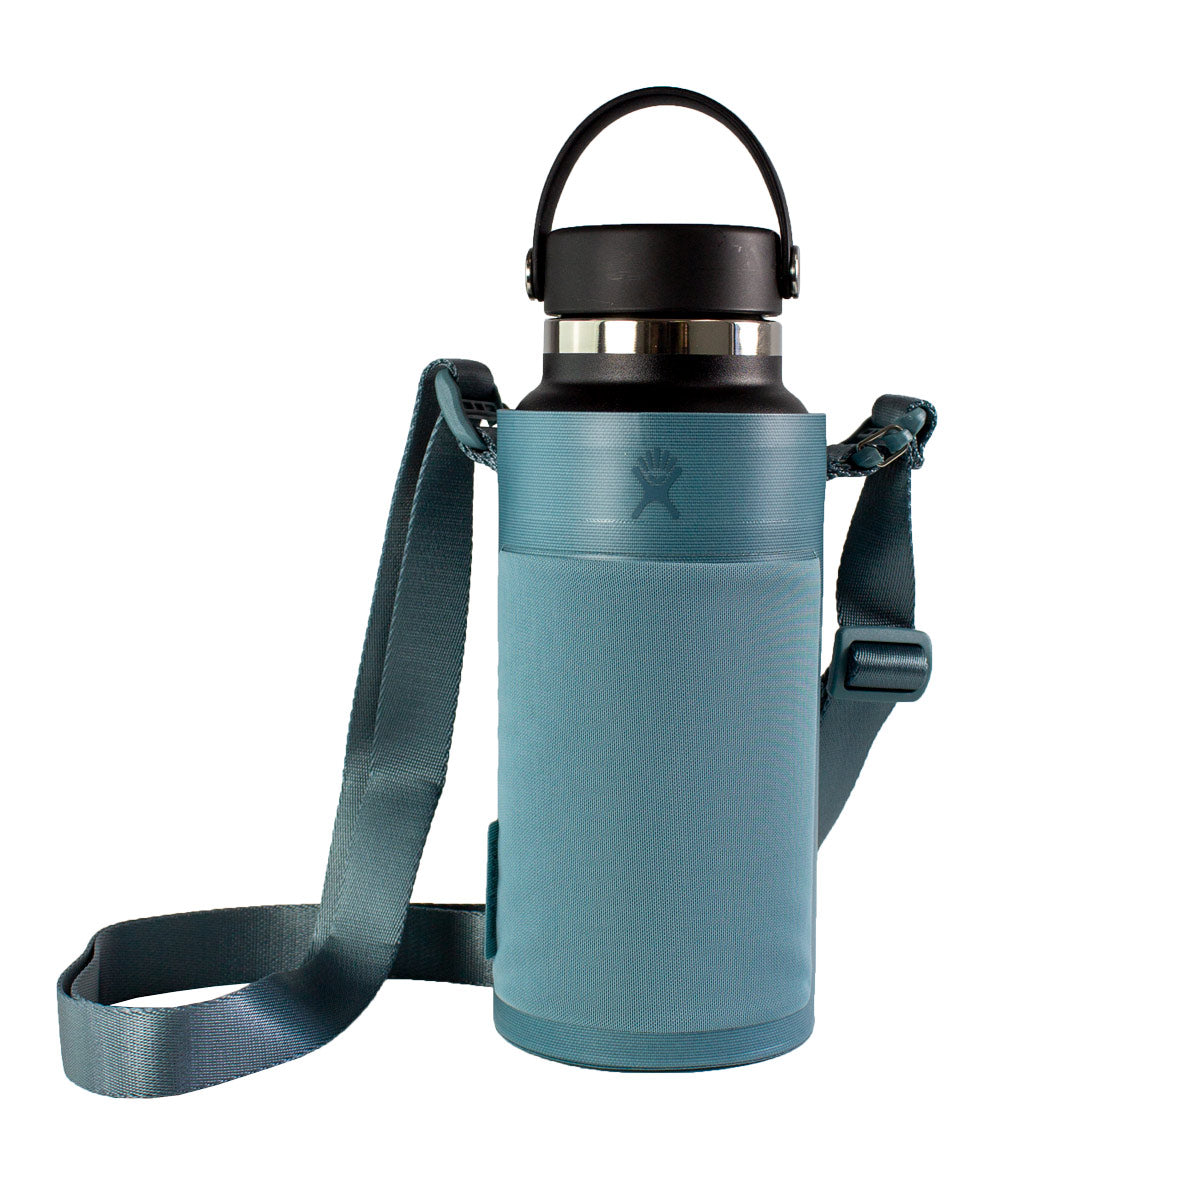 Hydro Flask Singapore - Take your #HydroFlask with you on an adventure. Our Bottle  Sling stays light when you need hands-free hydration.